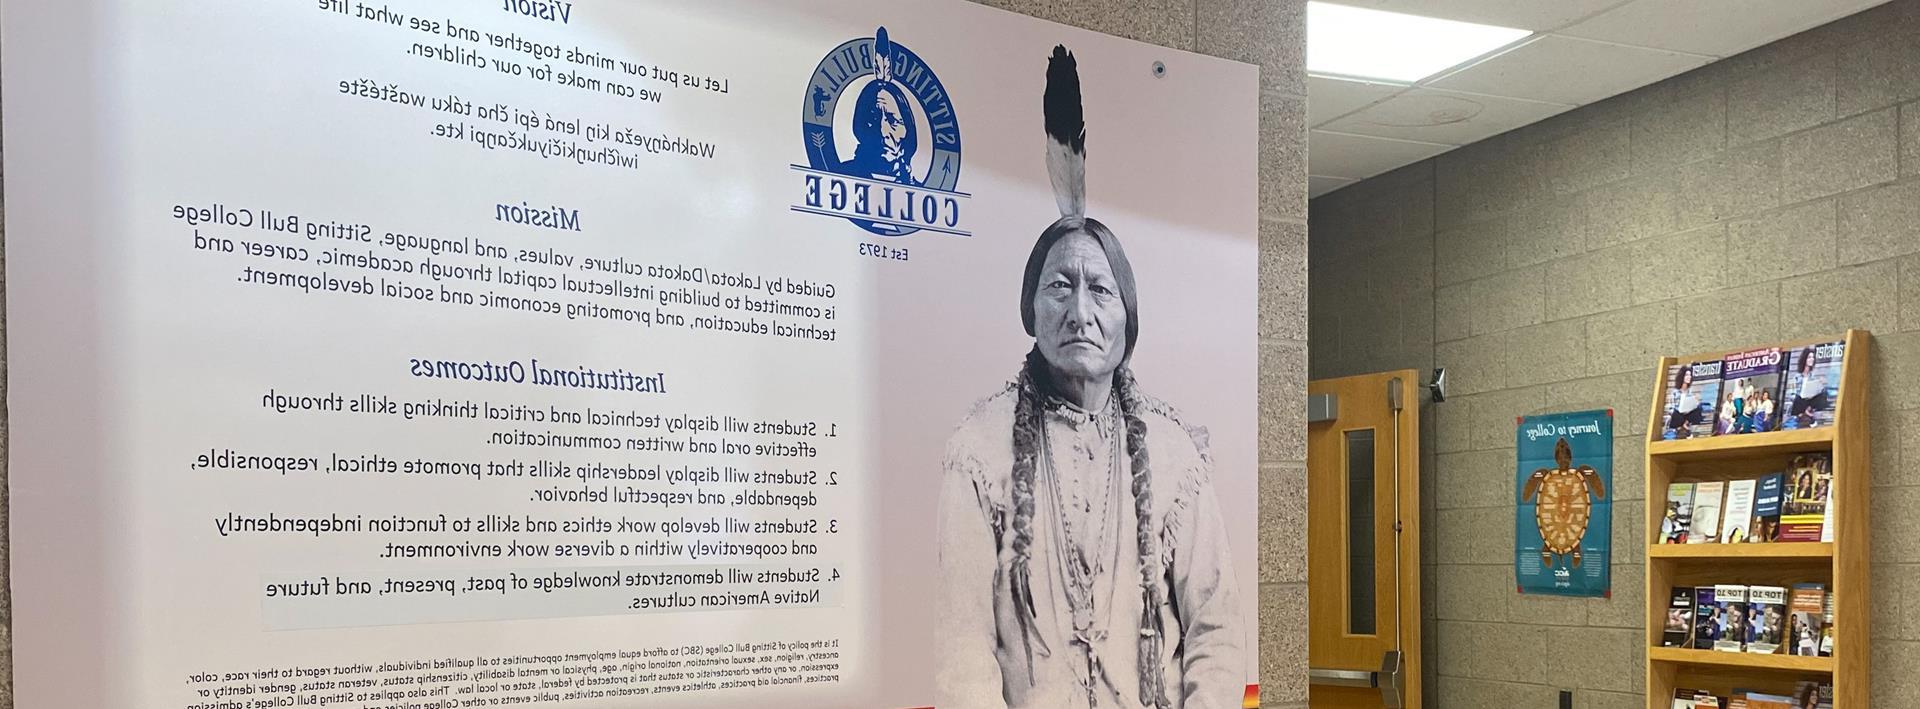 Sitting Bull College - Story Image